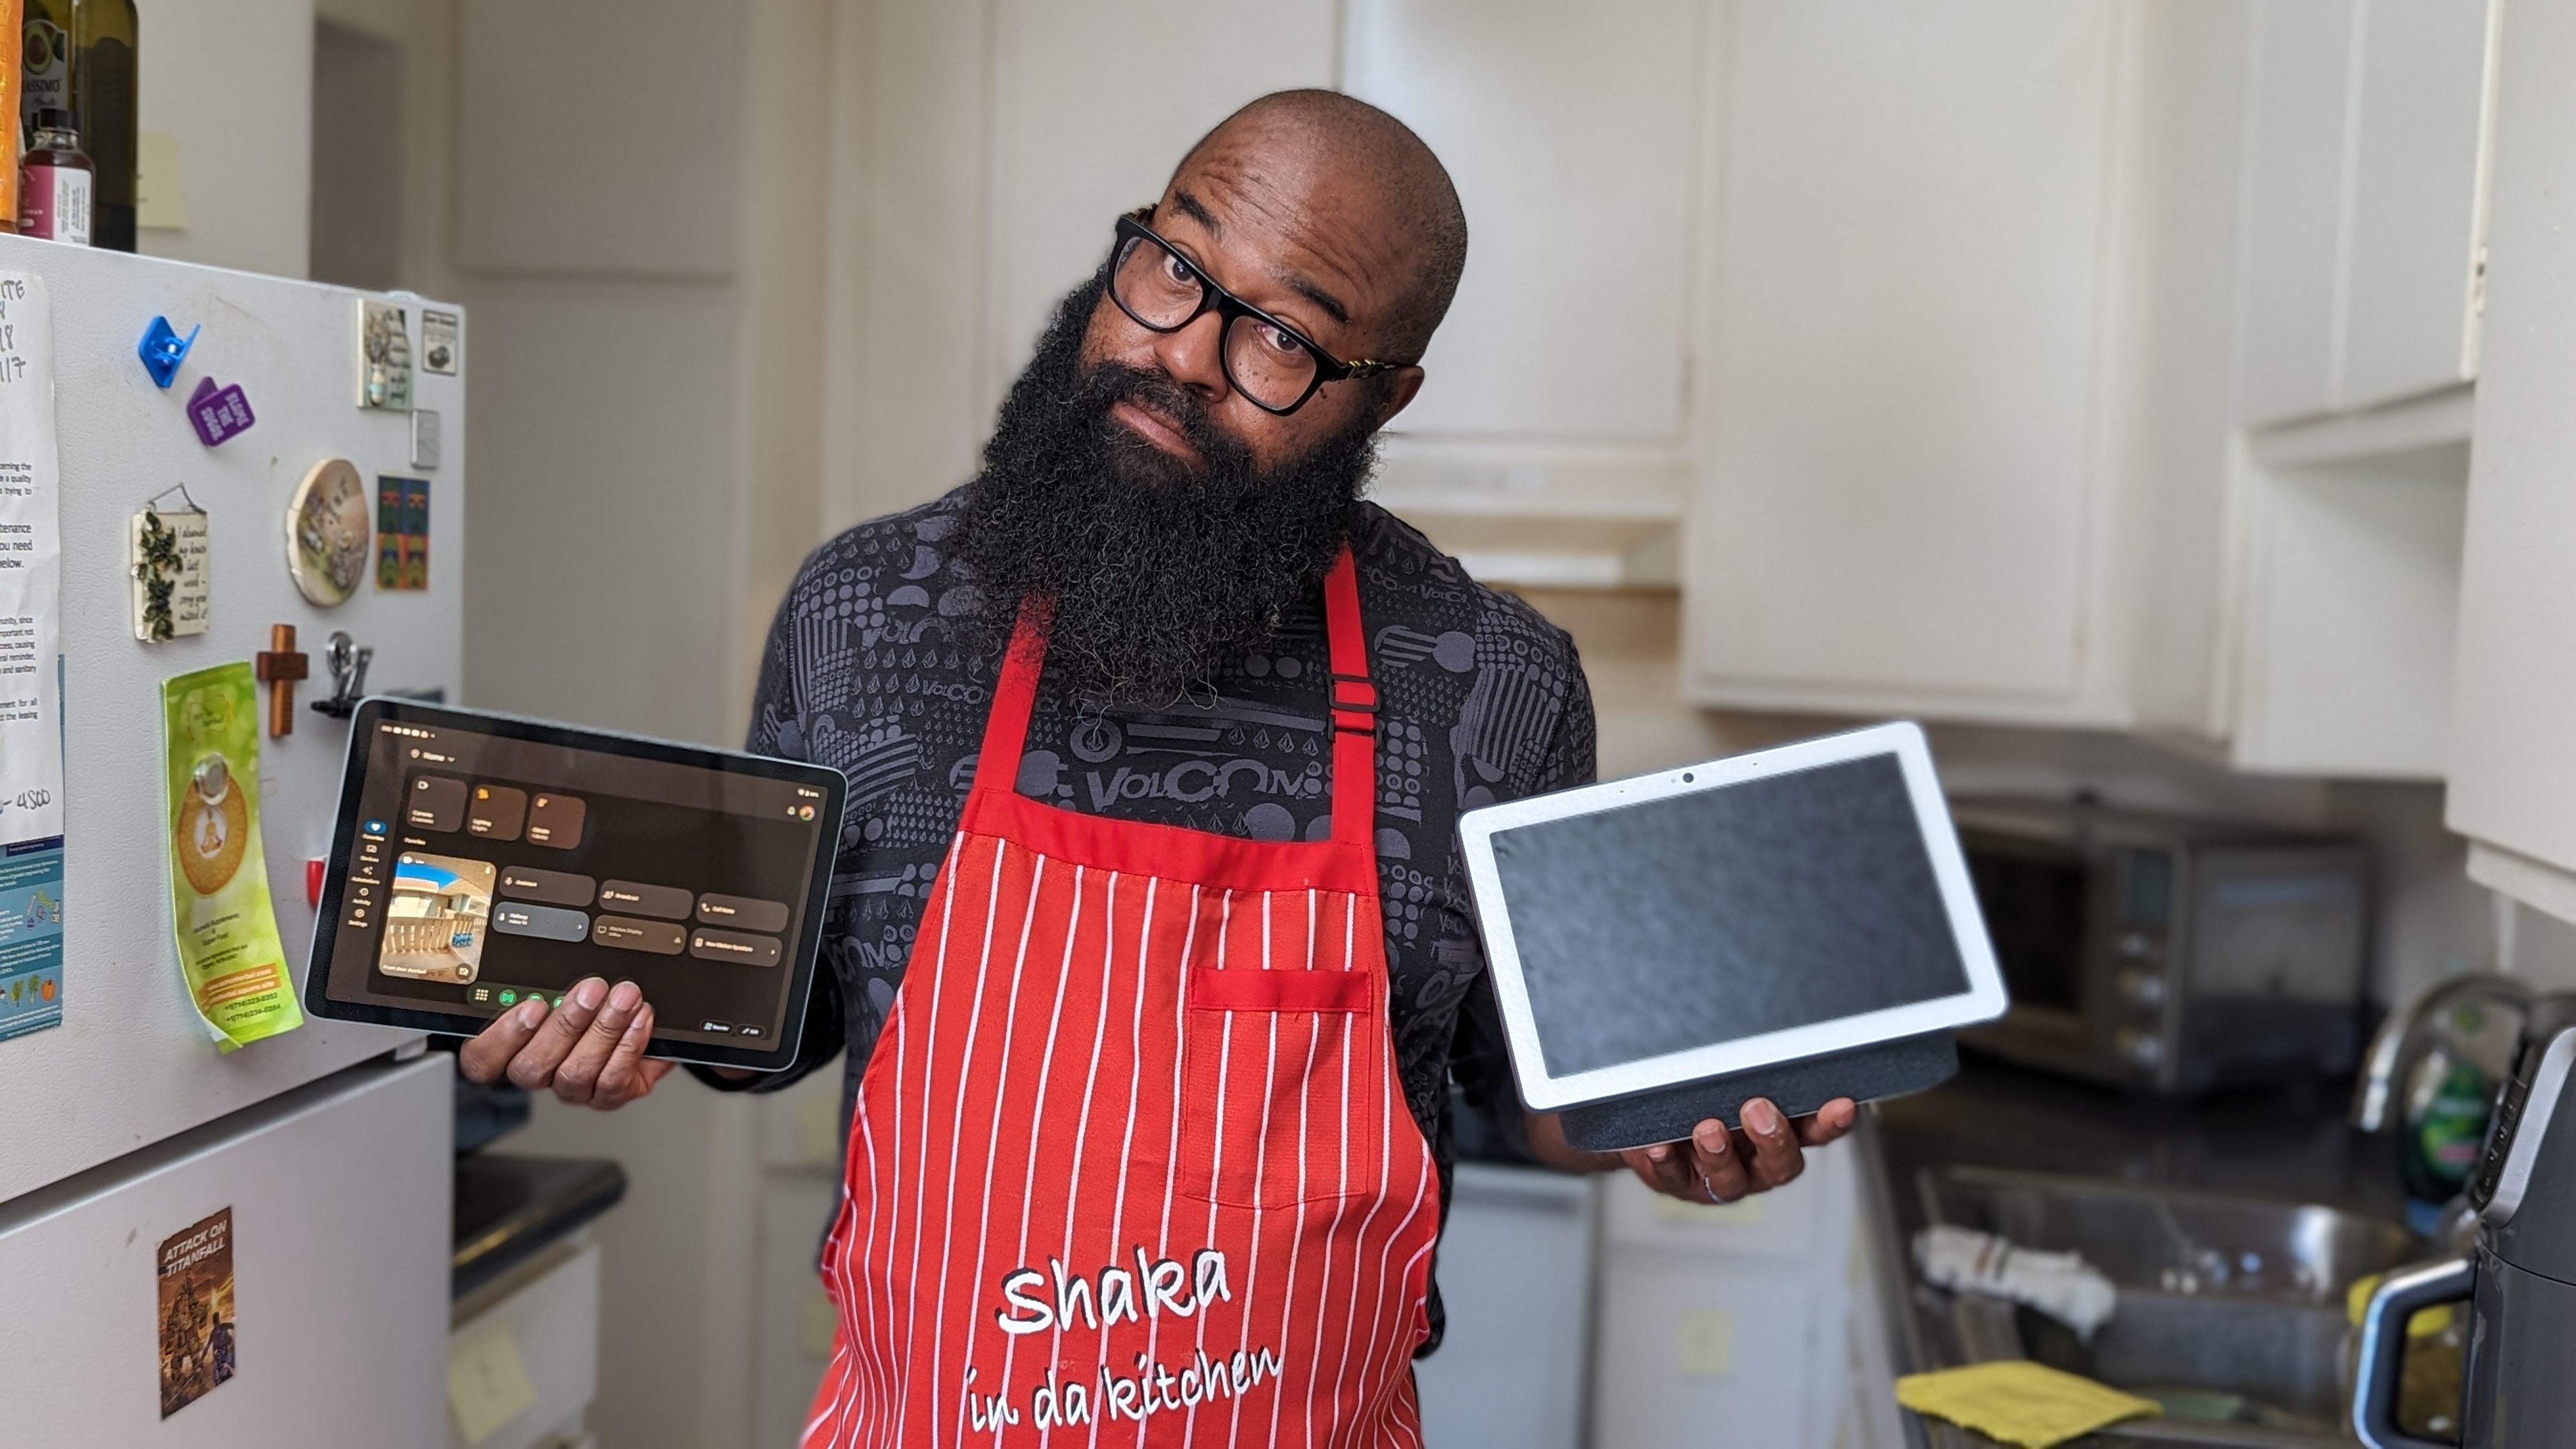 Tshaka holding up a Pixel Tablet and Nest Hub Max